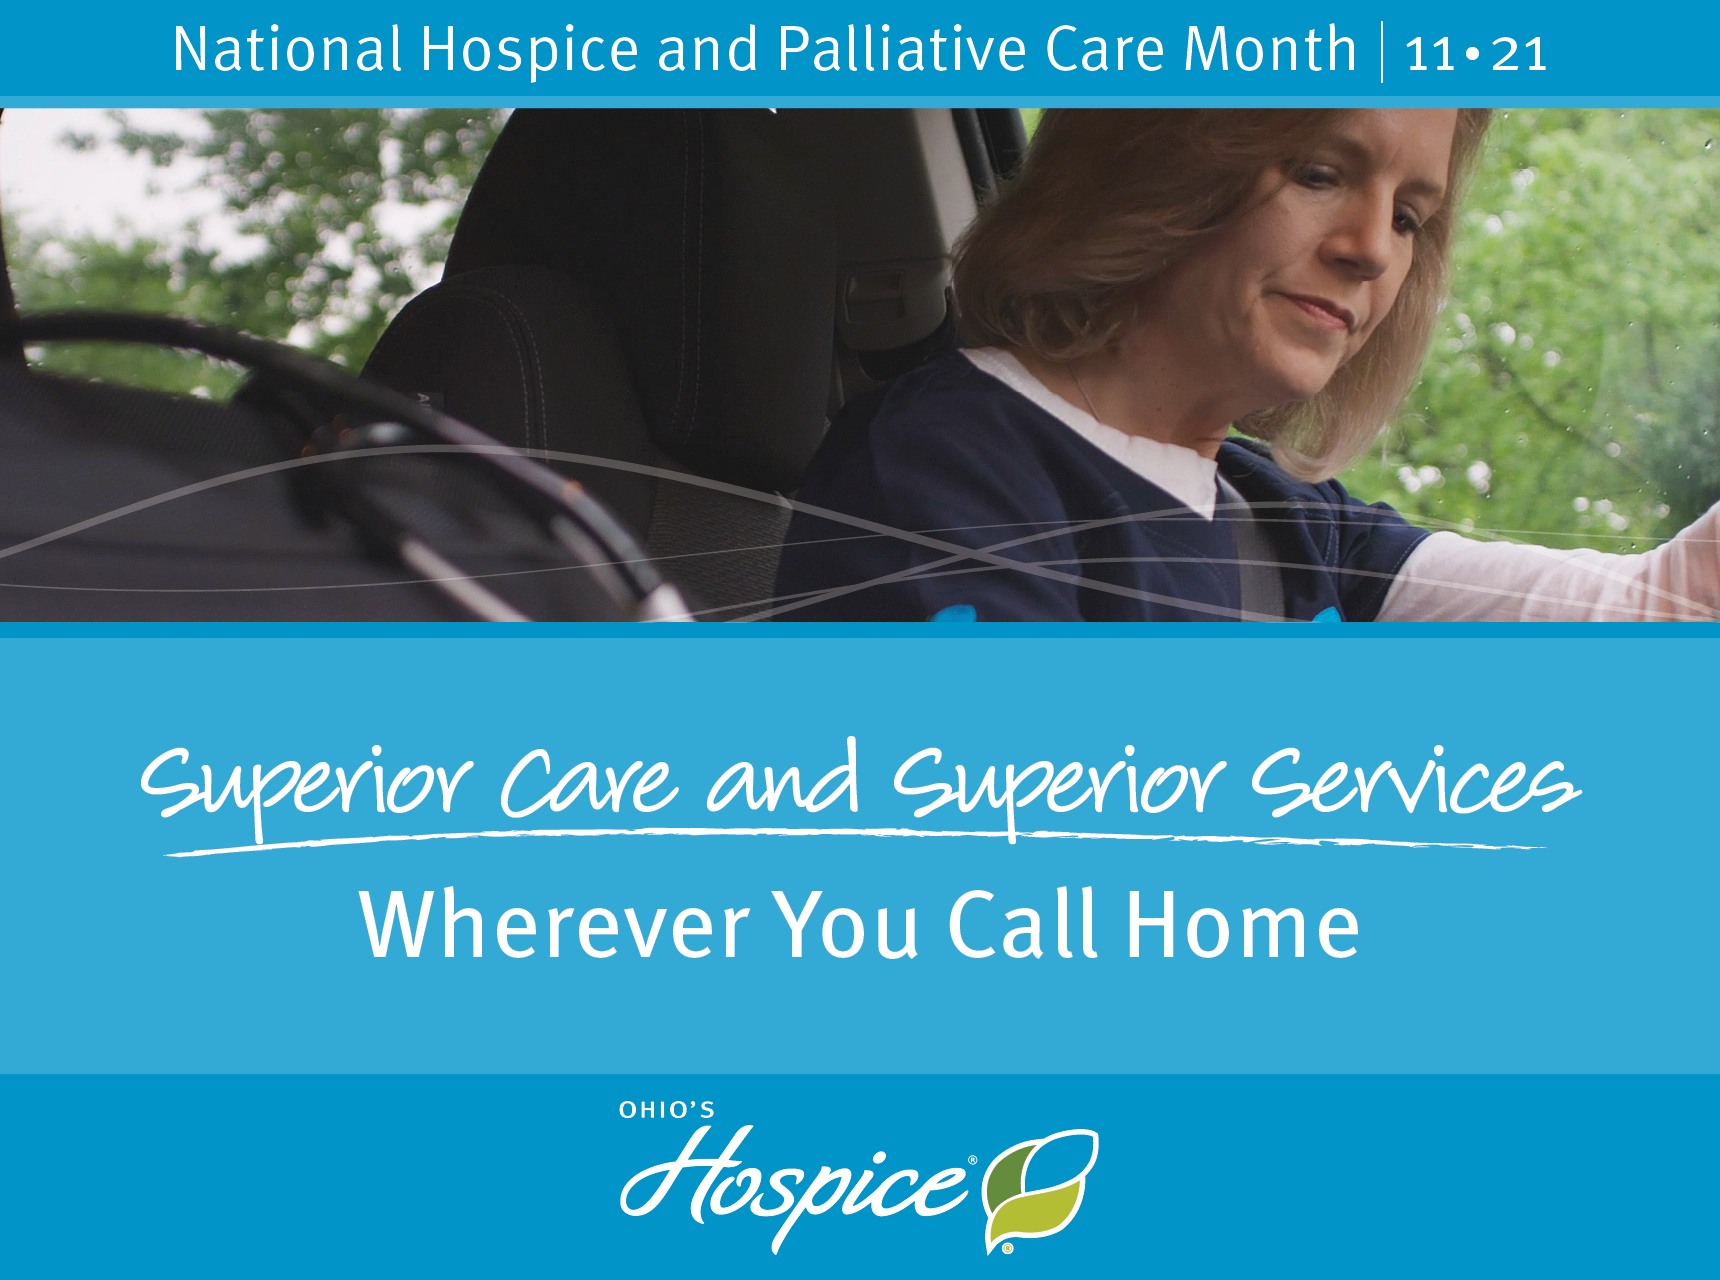 National Hospice and Palliative Care Month - Superior Care and Superior Services Wherever You Call Home - Ohio's Hospice